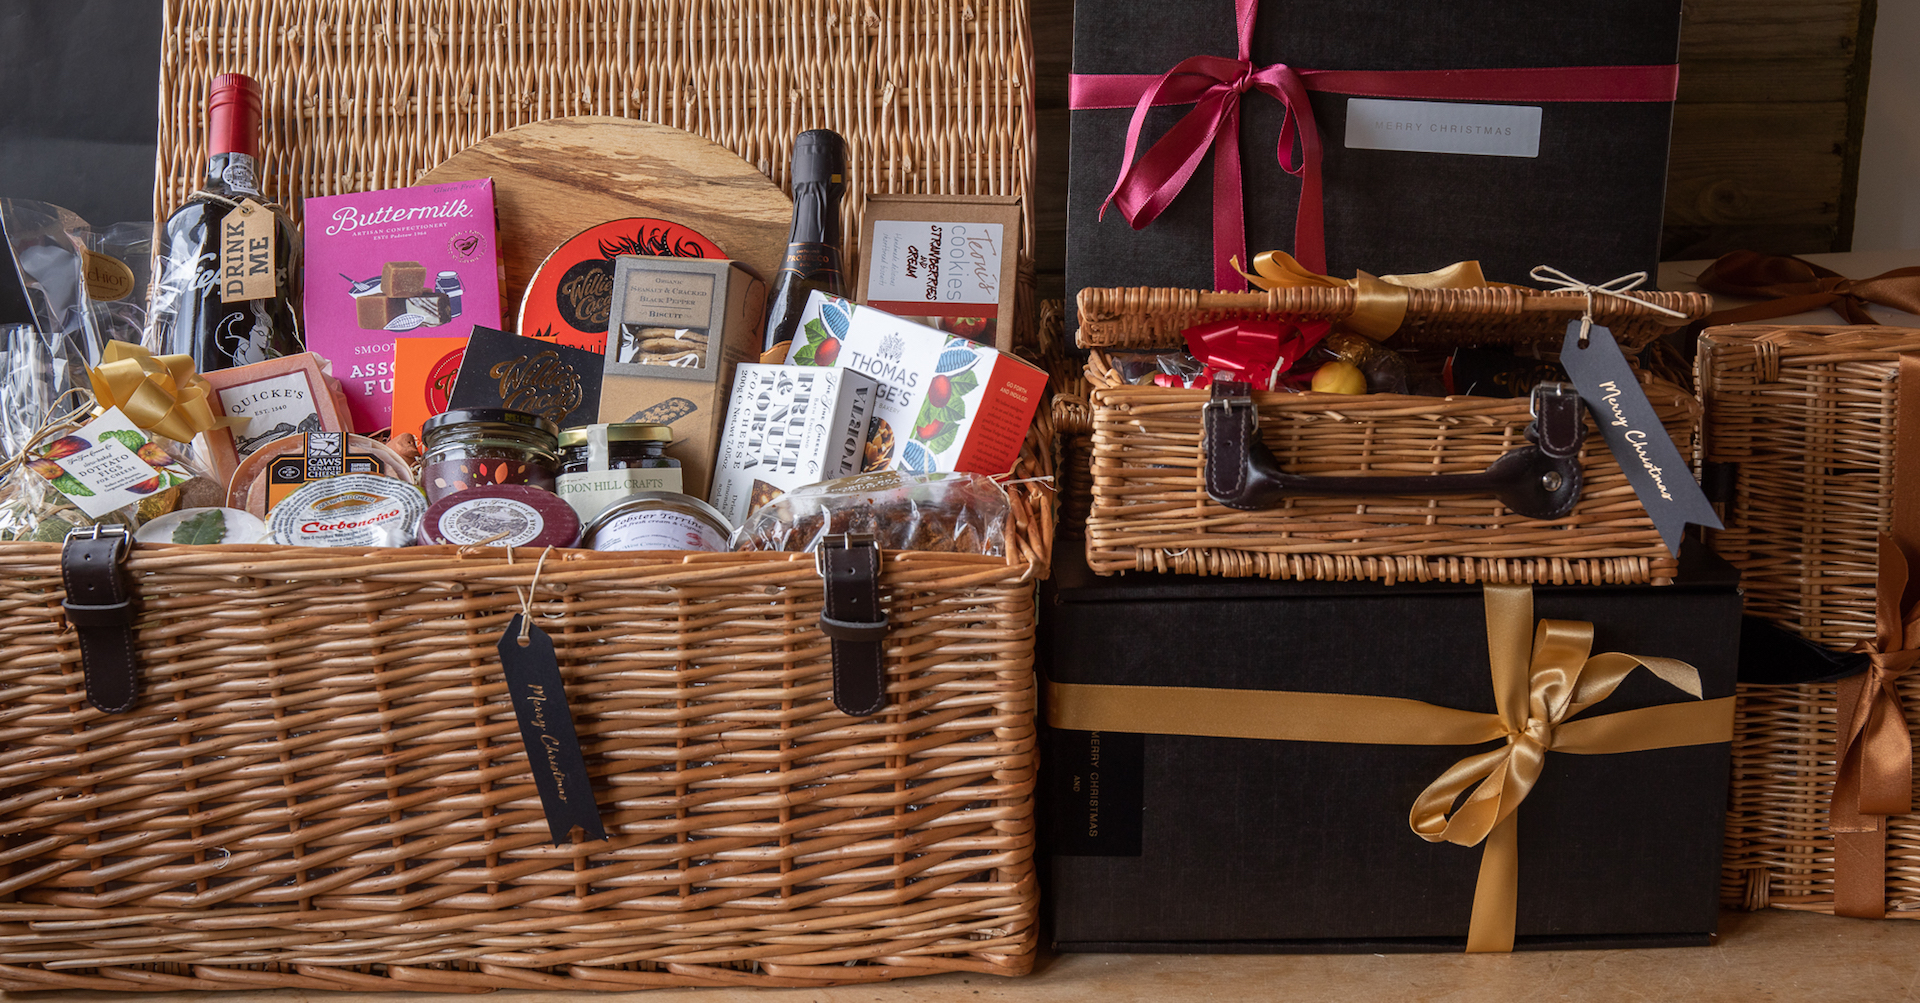 wiicker hampers filled with packets and jars of luxury food items.